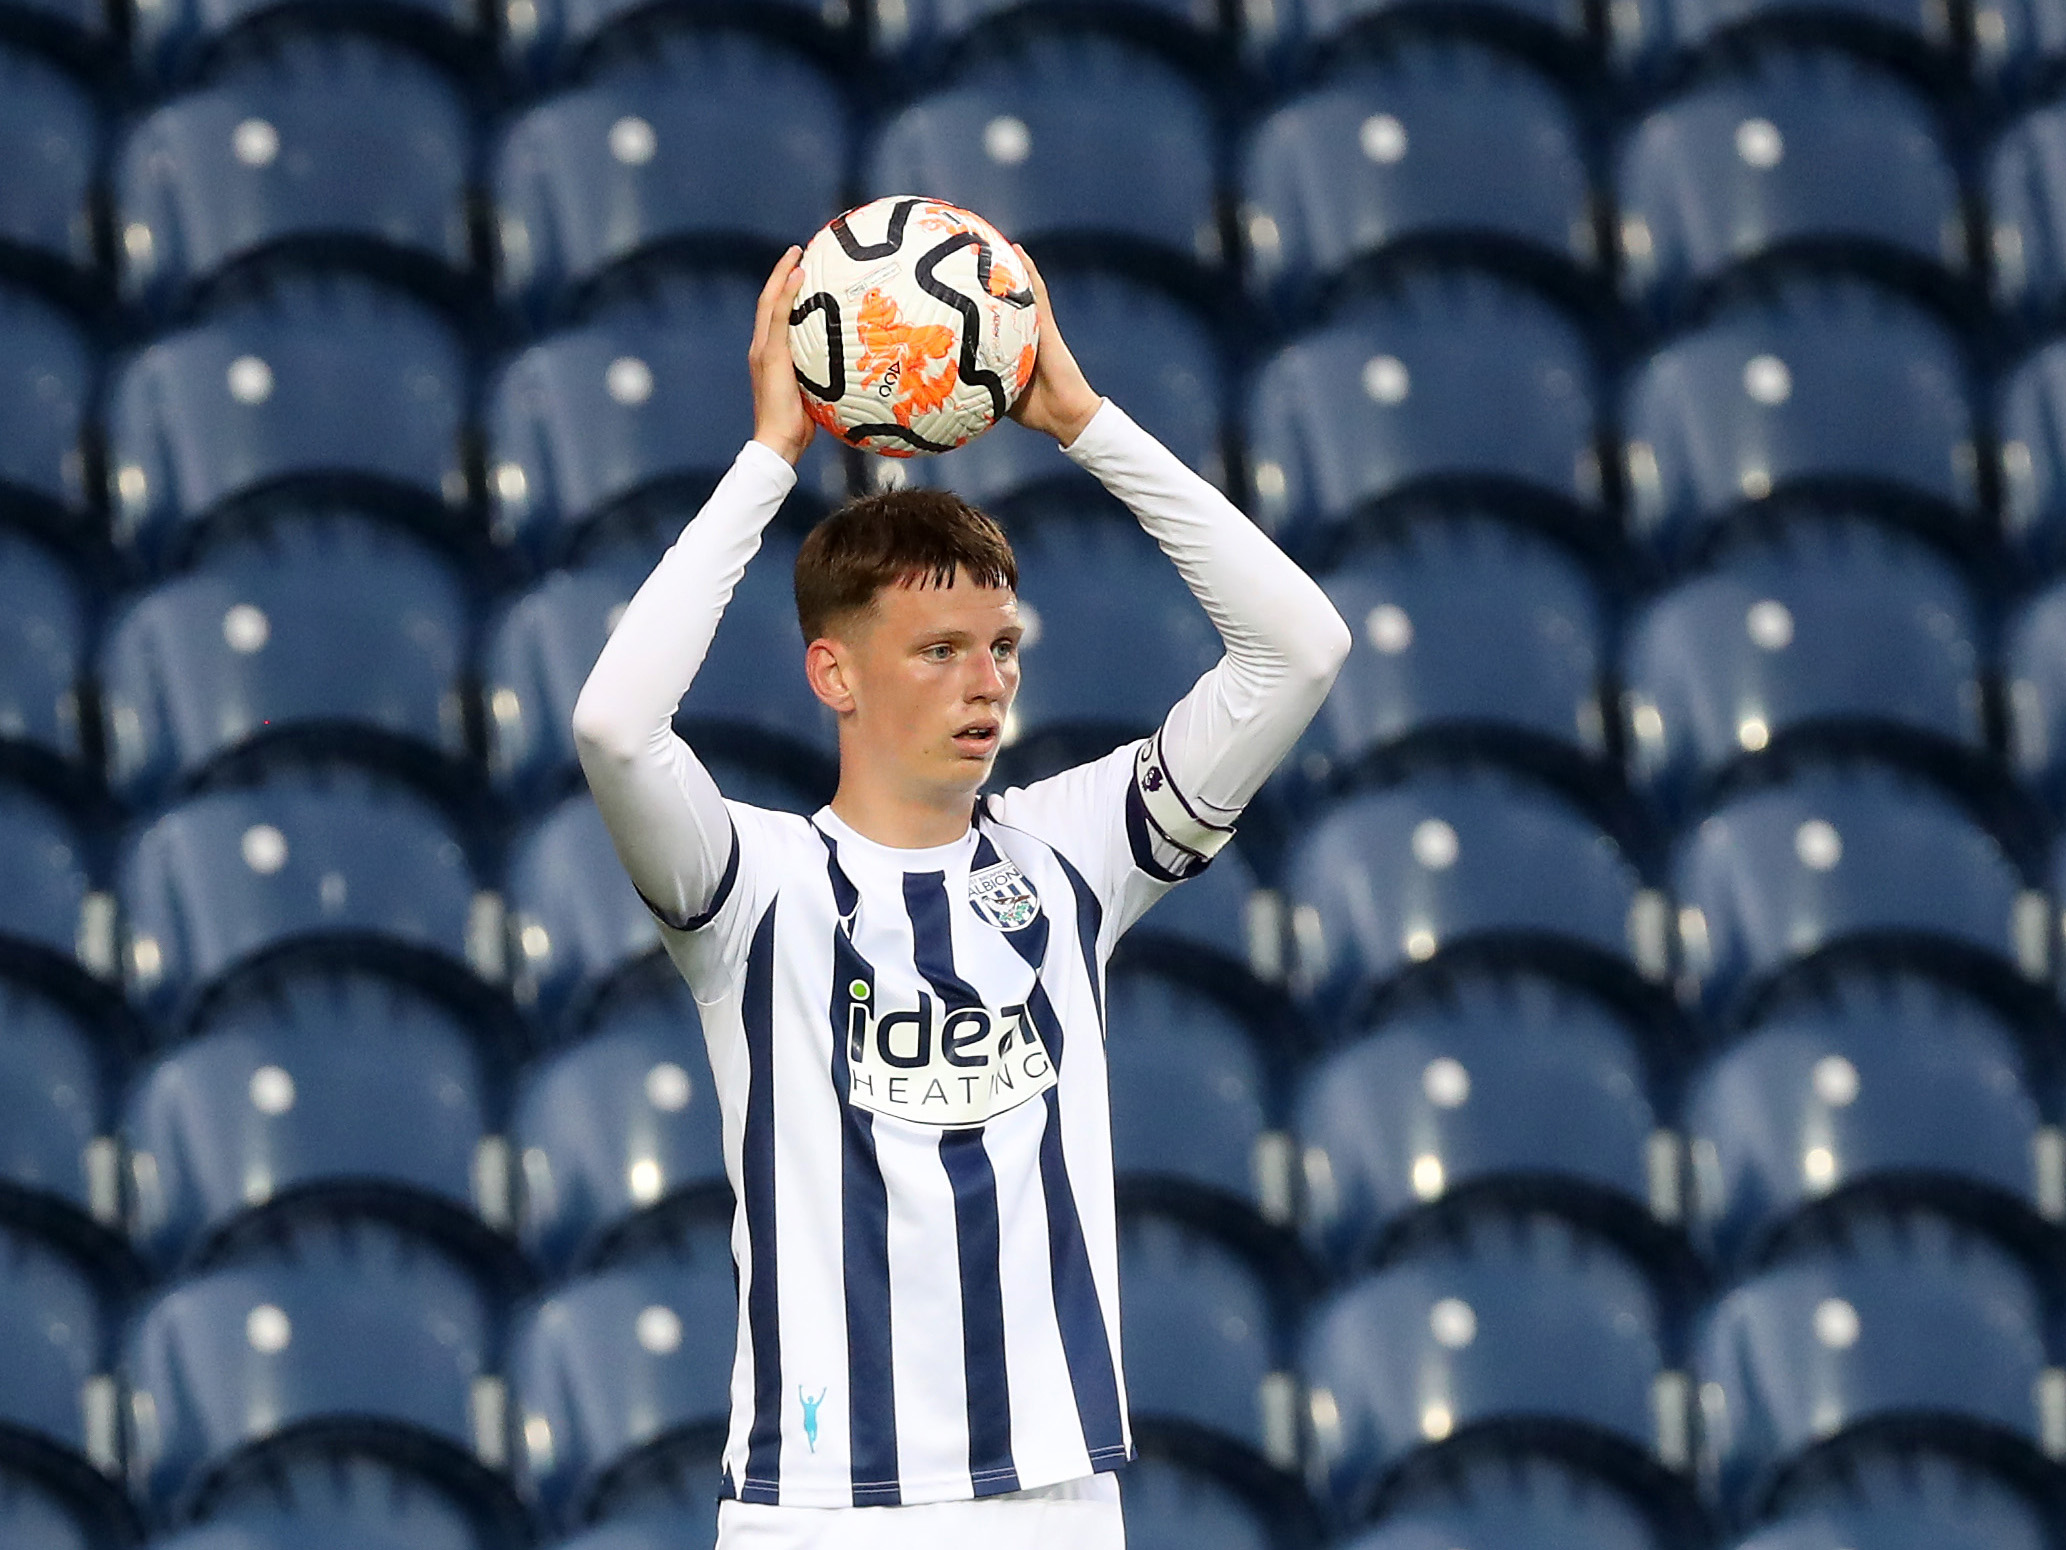 A photo of Albion academy graduate Reece Hall, in the 2023/24 home kit, taking a throw-in at The Hawthorns during Albion's PL2 game v Blackburn Rovers